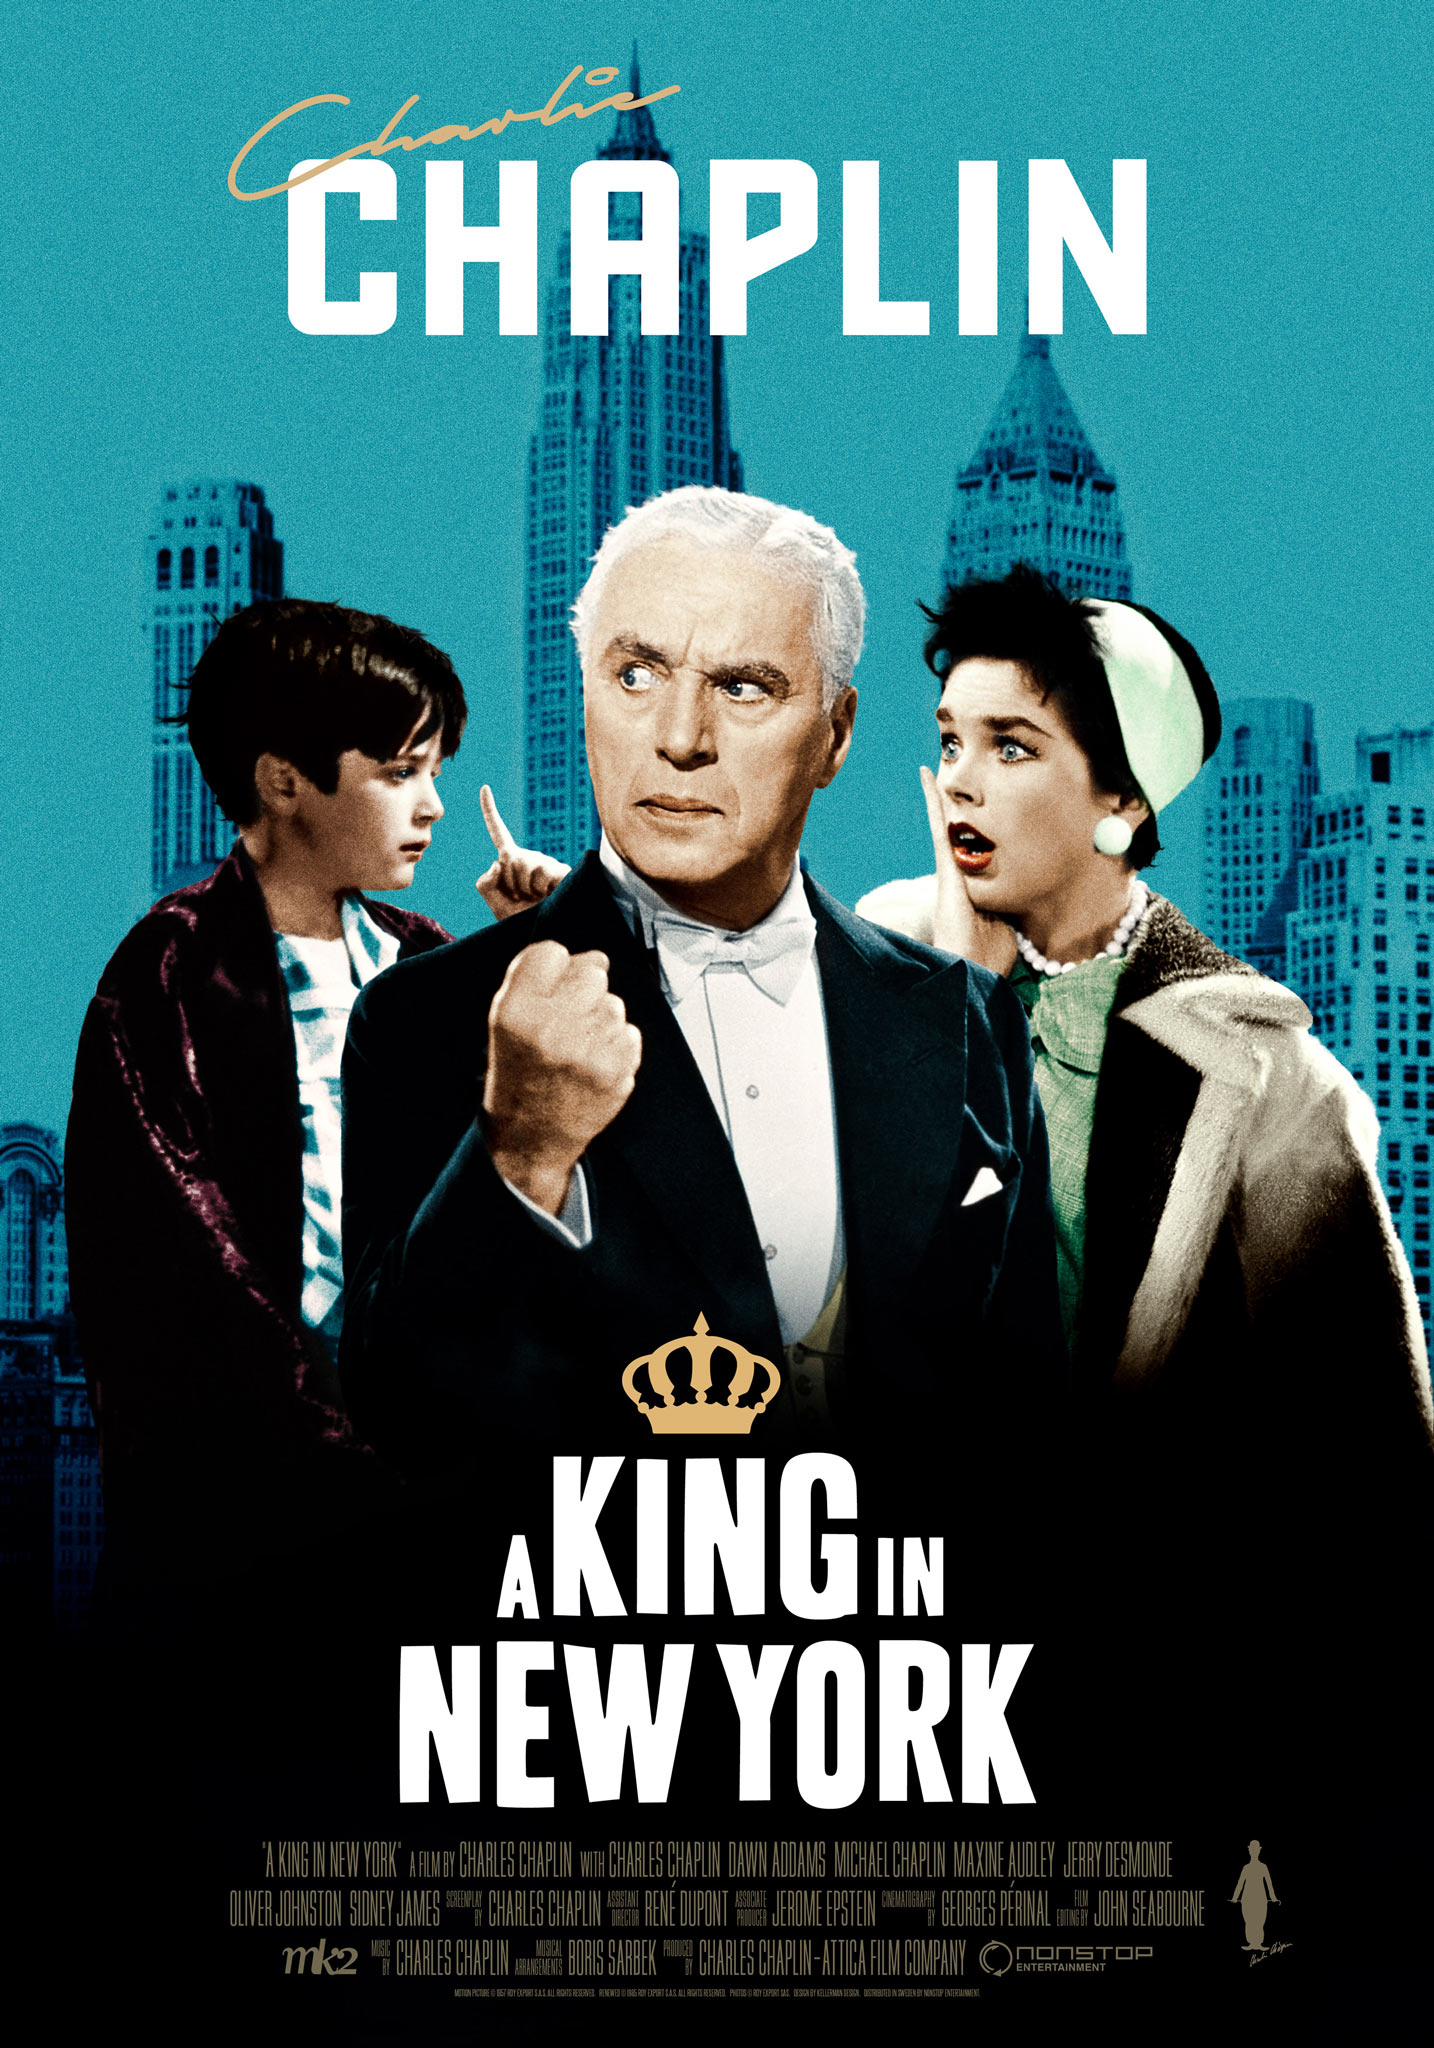 A King in New York (1957) theatrical onesheet